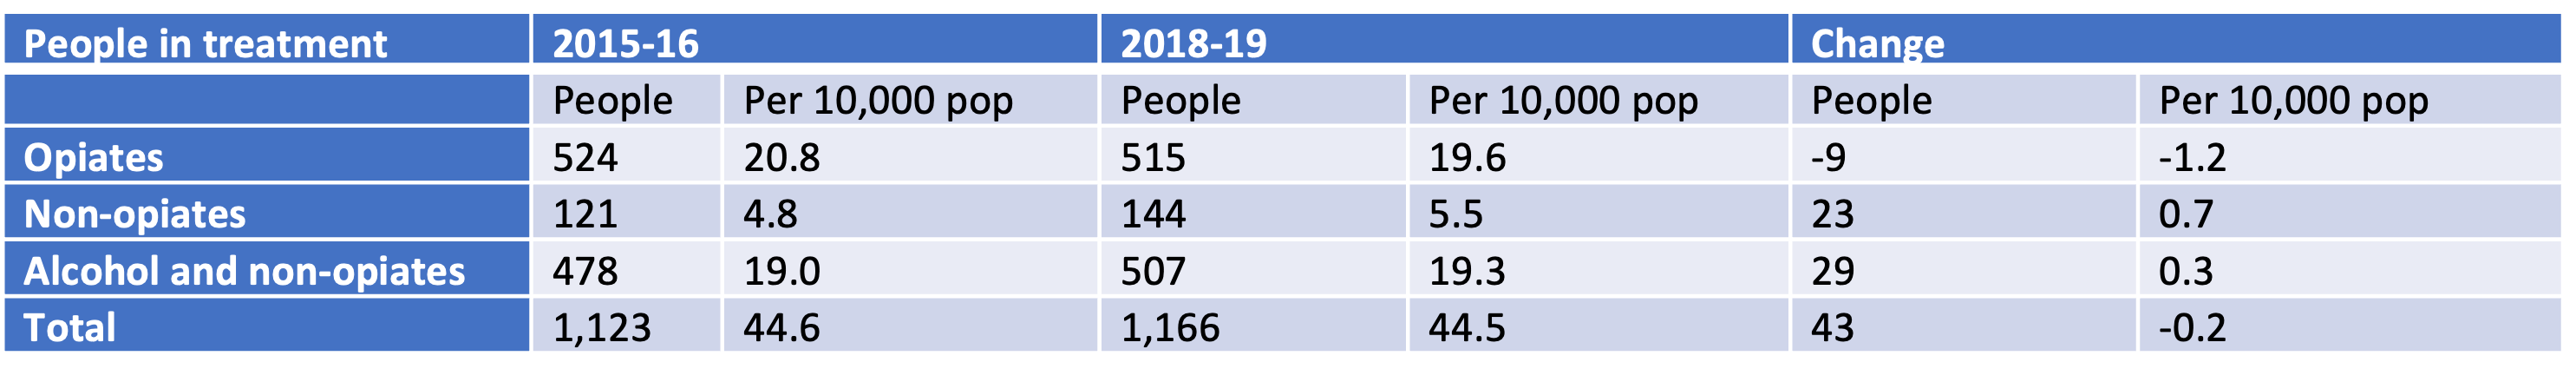 People in treatment, 2015/16-2018/19